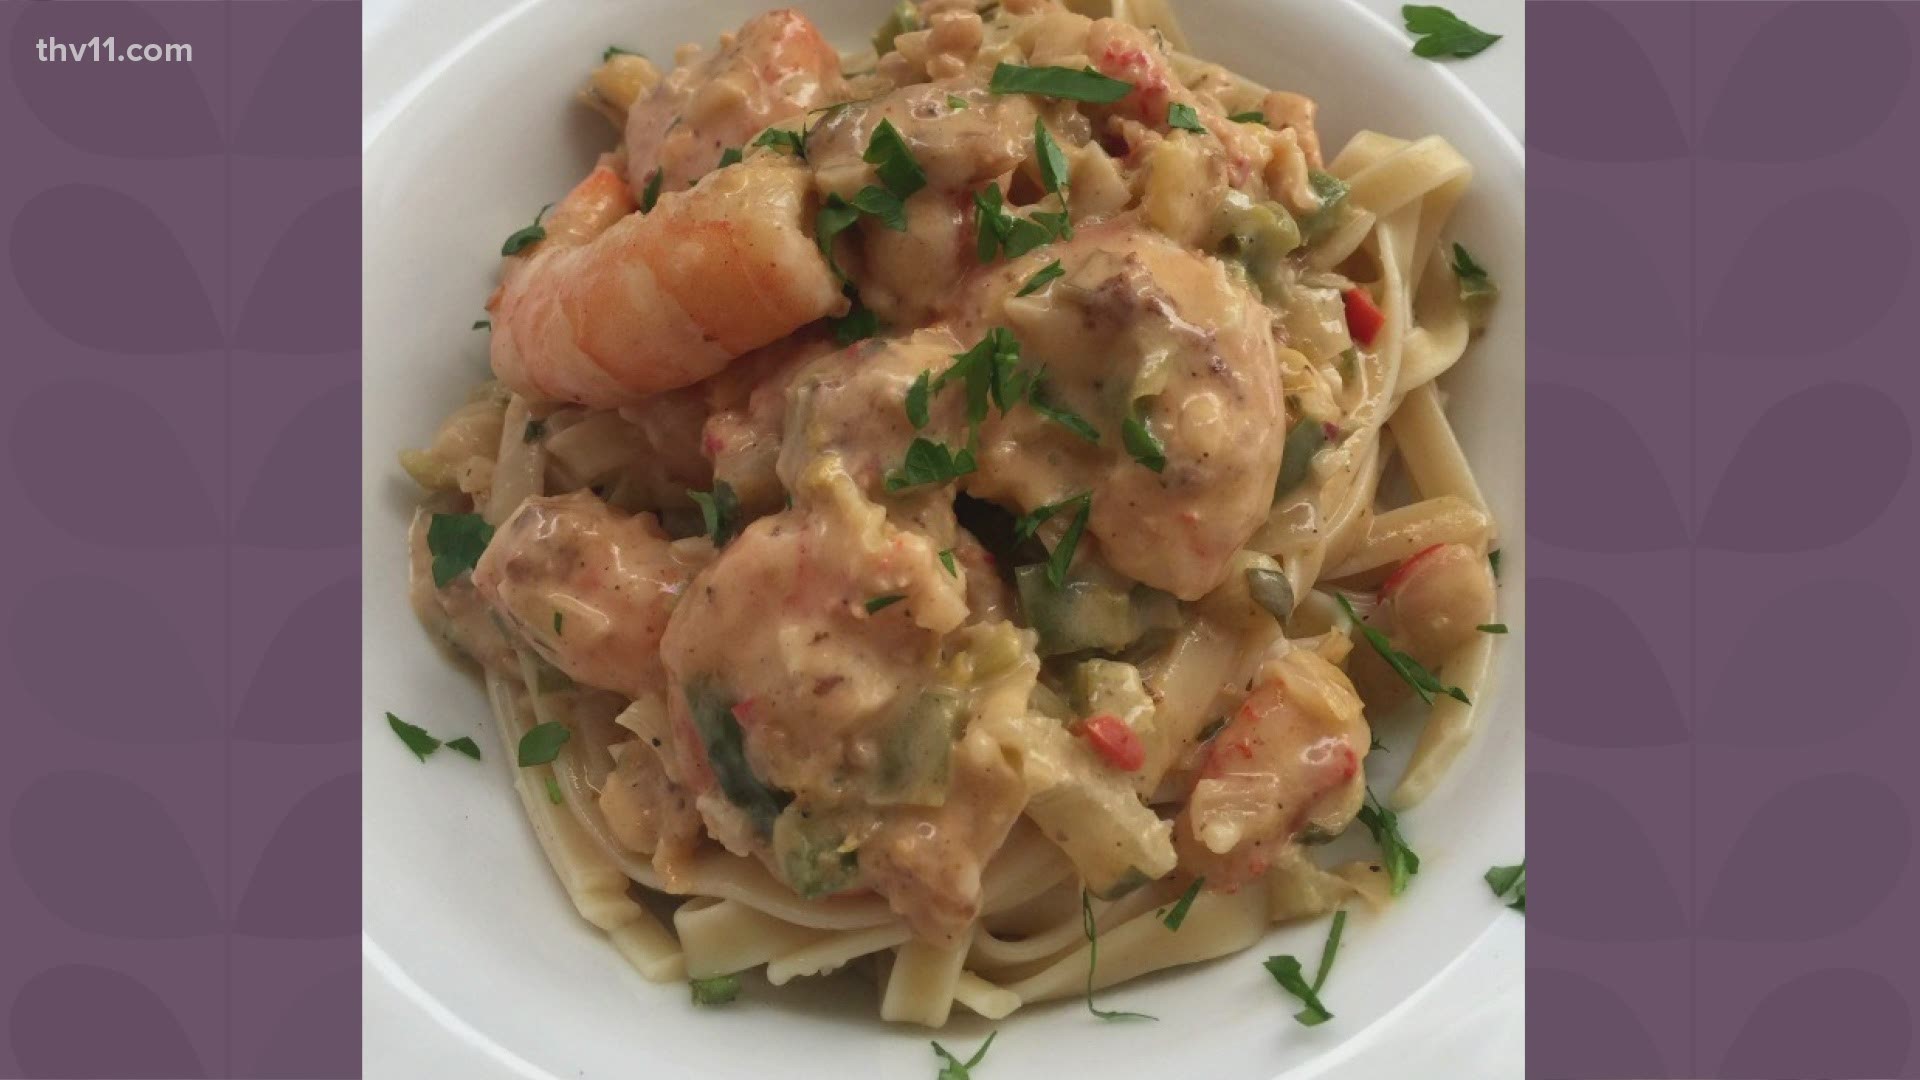 Celebrate the flavors of Mardi Gras with Debbie Arnold's Creole linguine with shrimp and crawfish recipe.